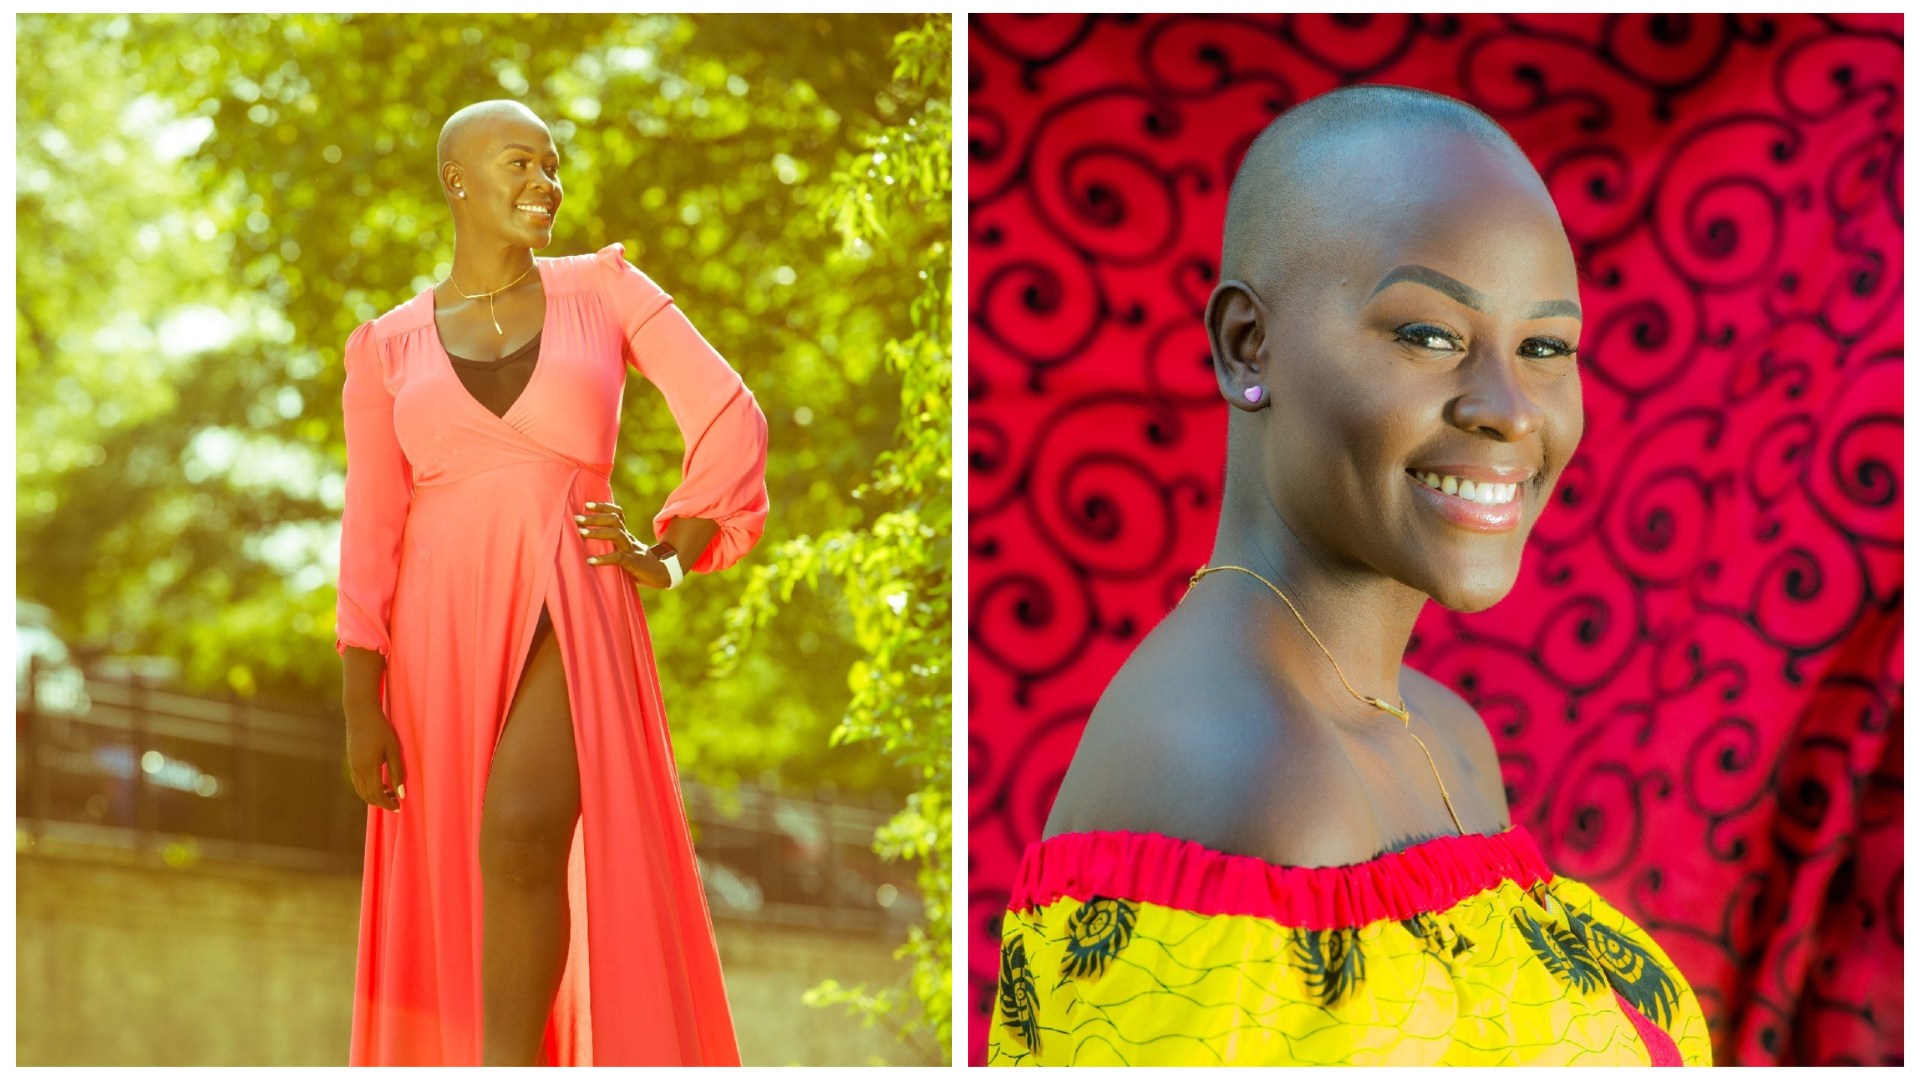 On her first day of chemo, Akwi decided to become a cancer awareness advocate. Now, she’s cancer free and leads her own non-profit foundation.